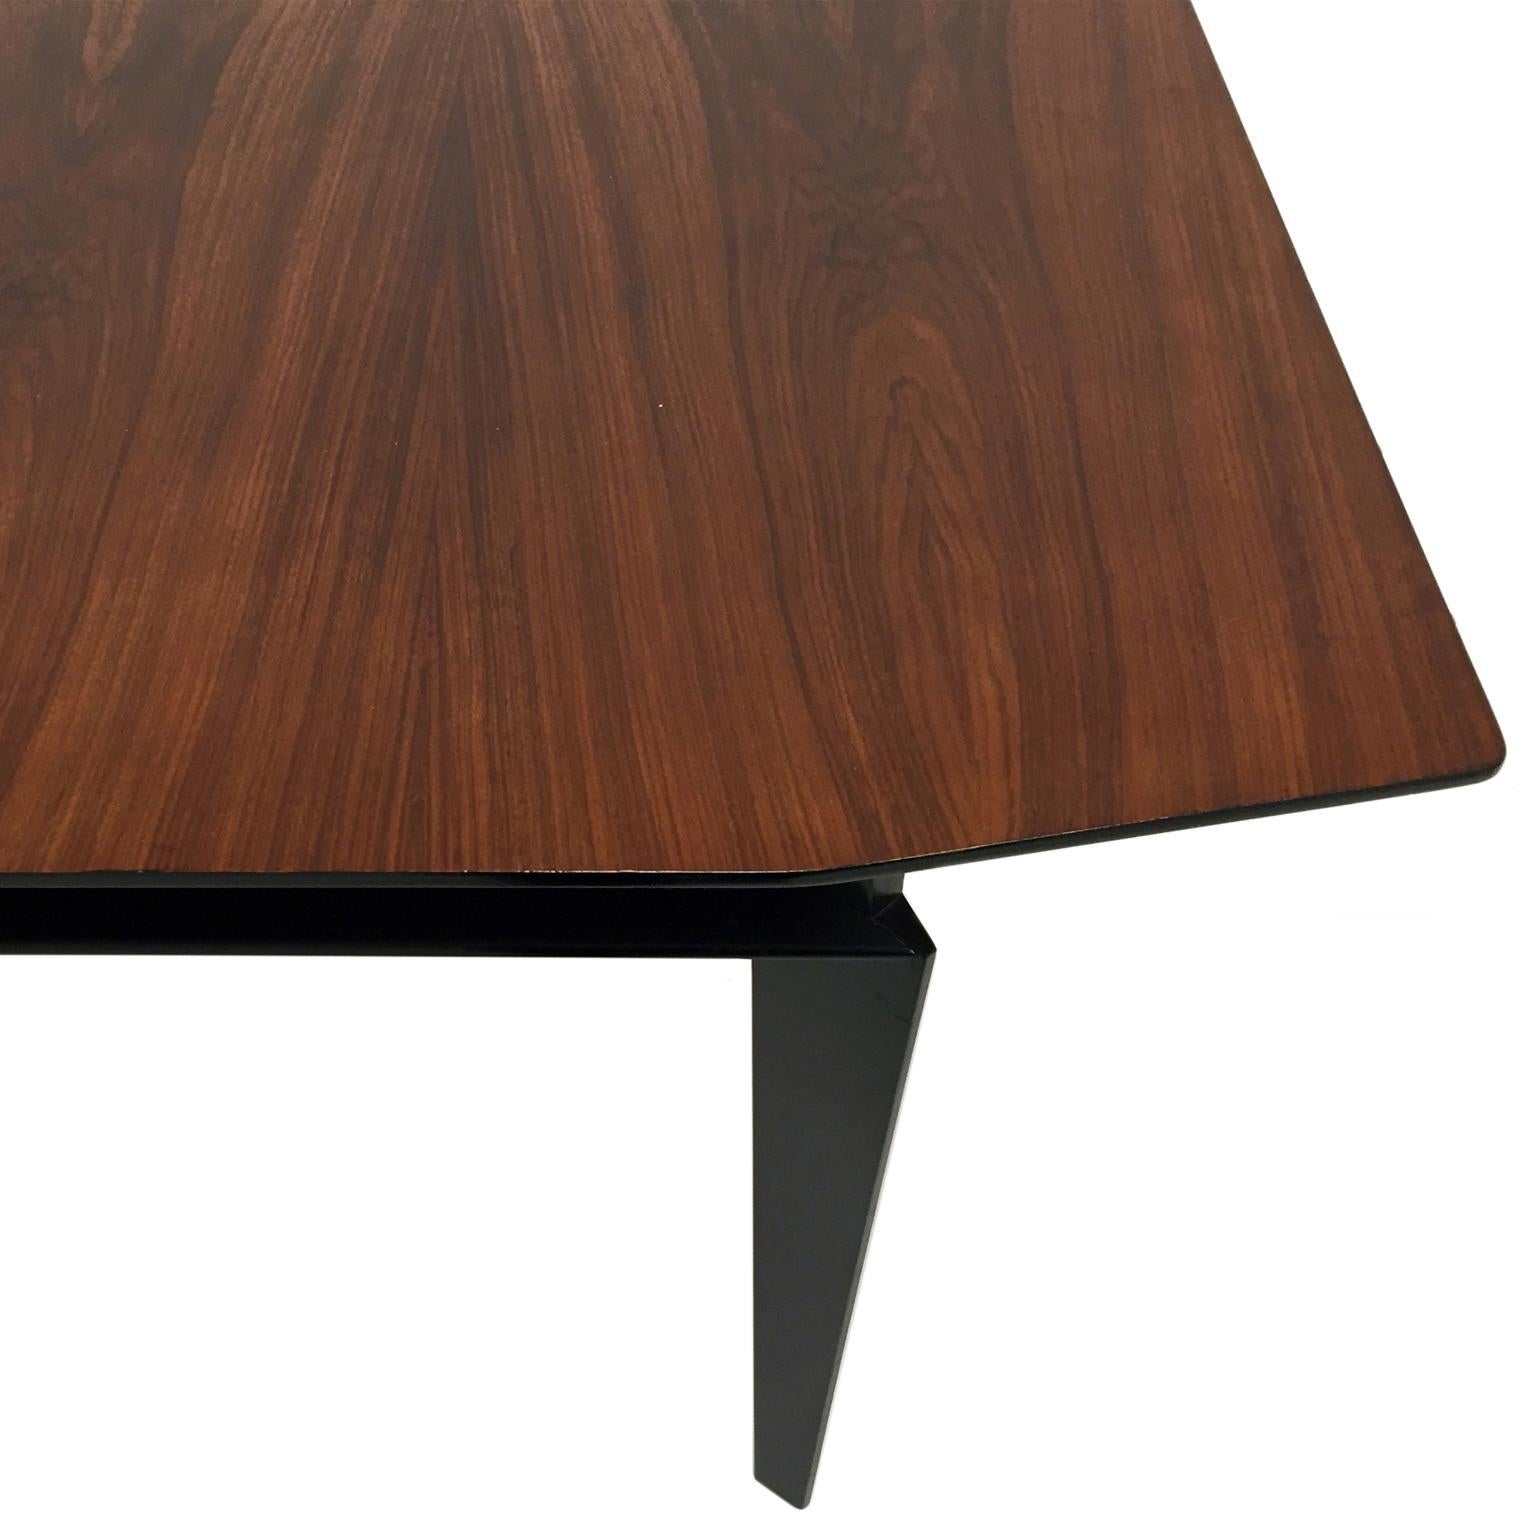 20th Century Midcentury Italian Extendable Rosewood Dining Table by Vittorio Dassi